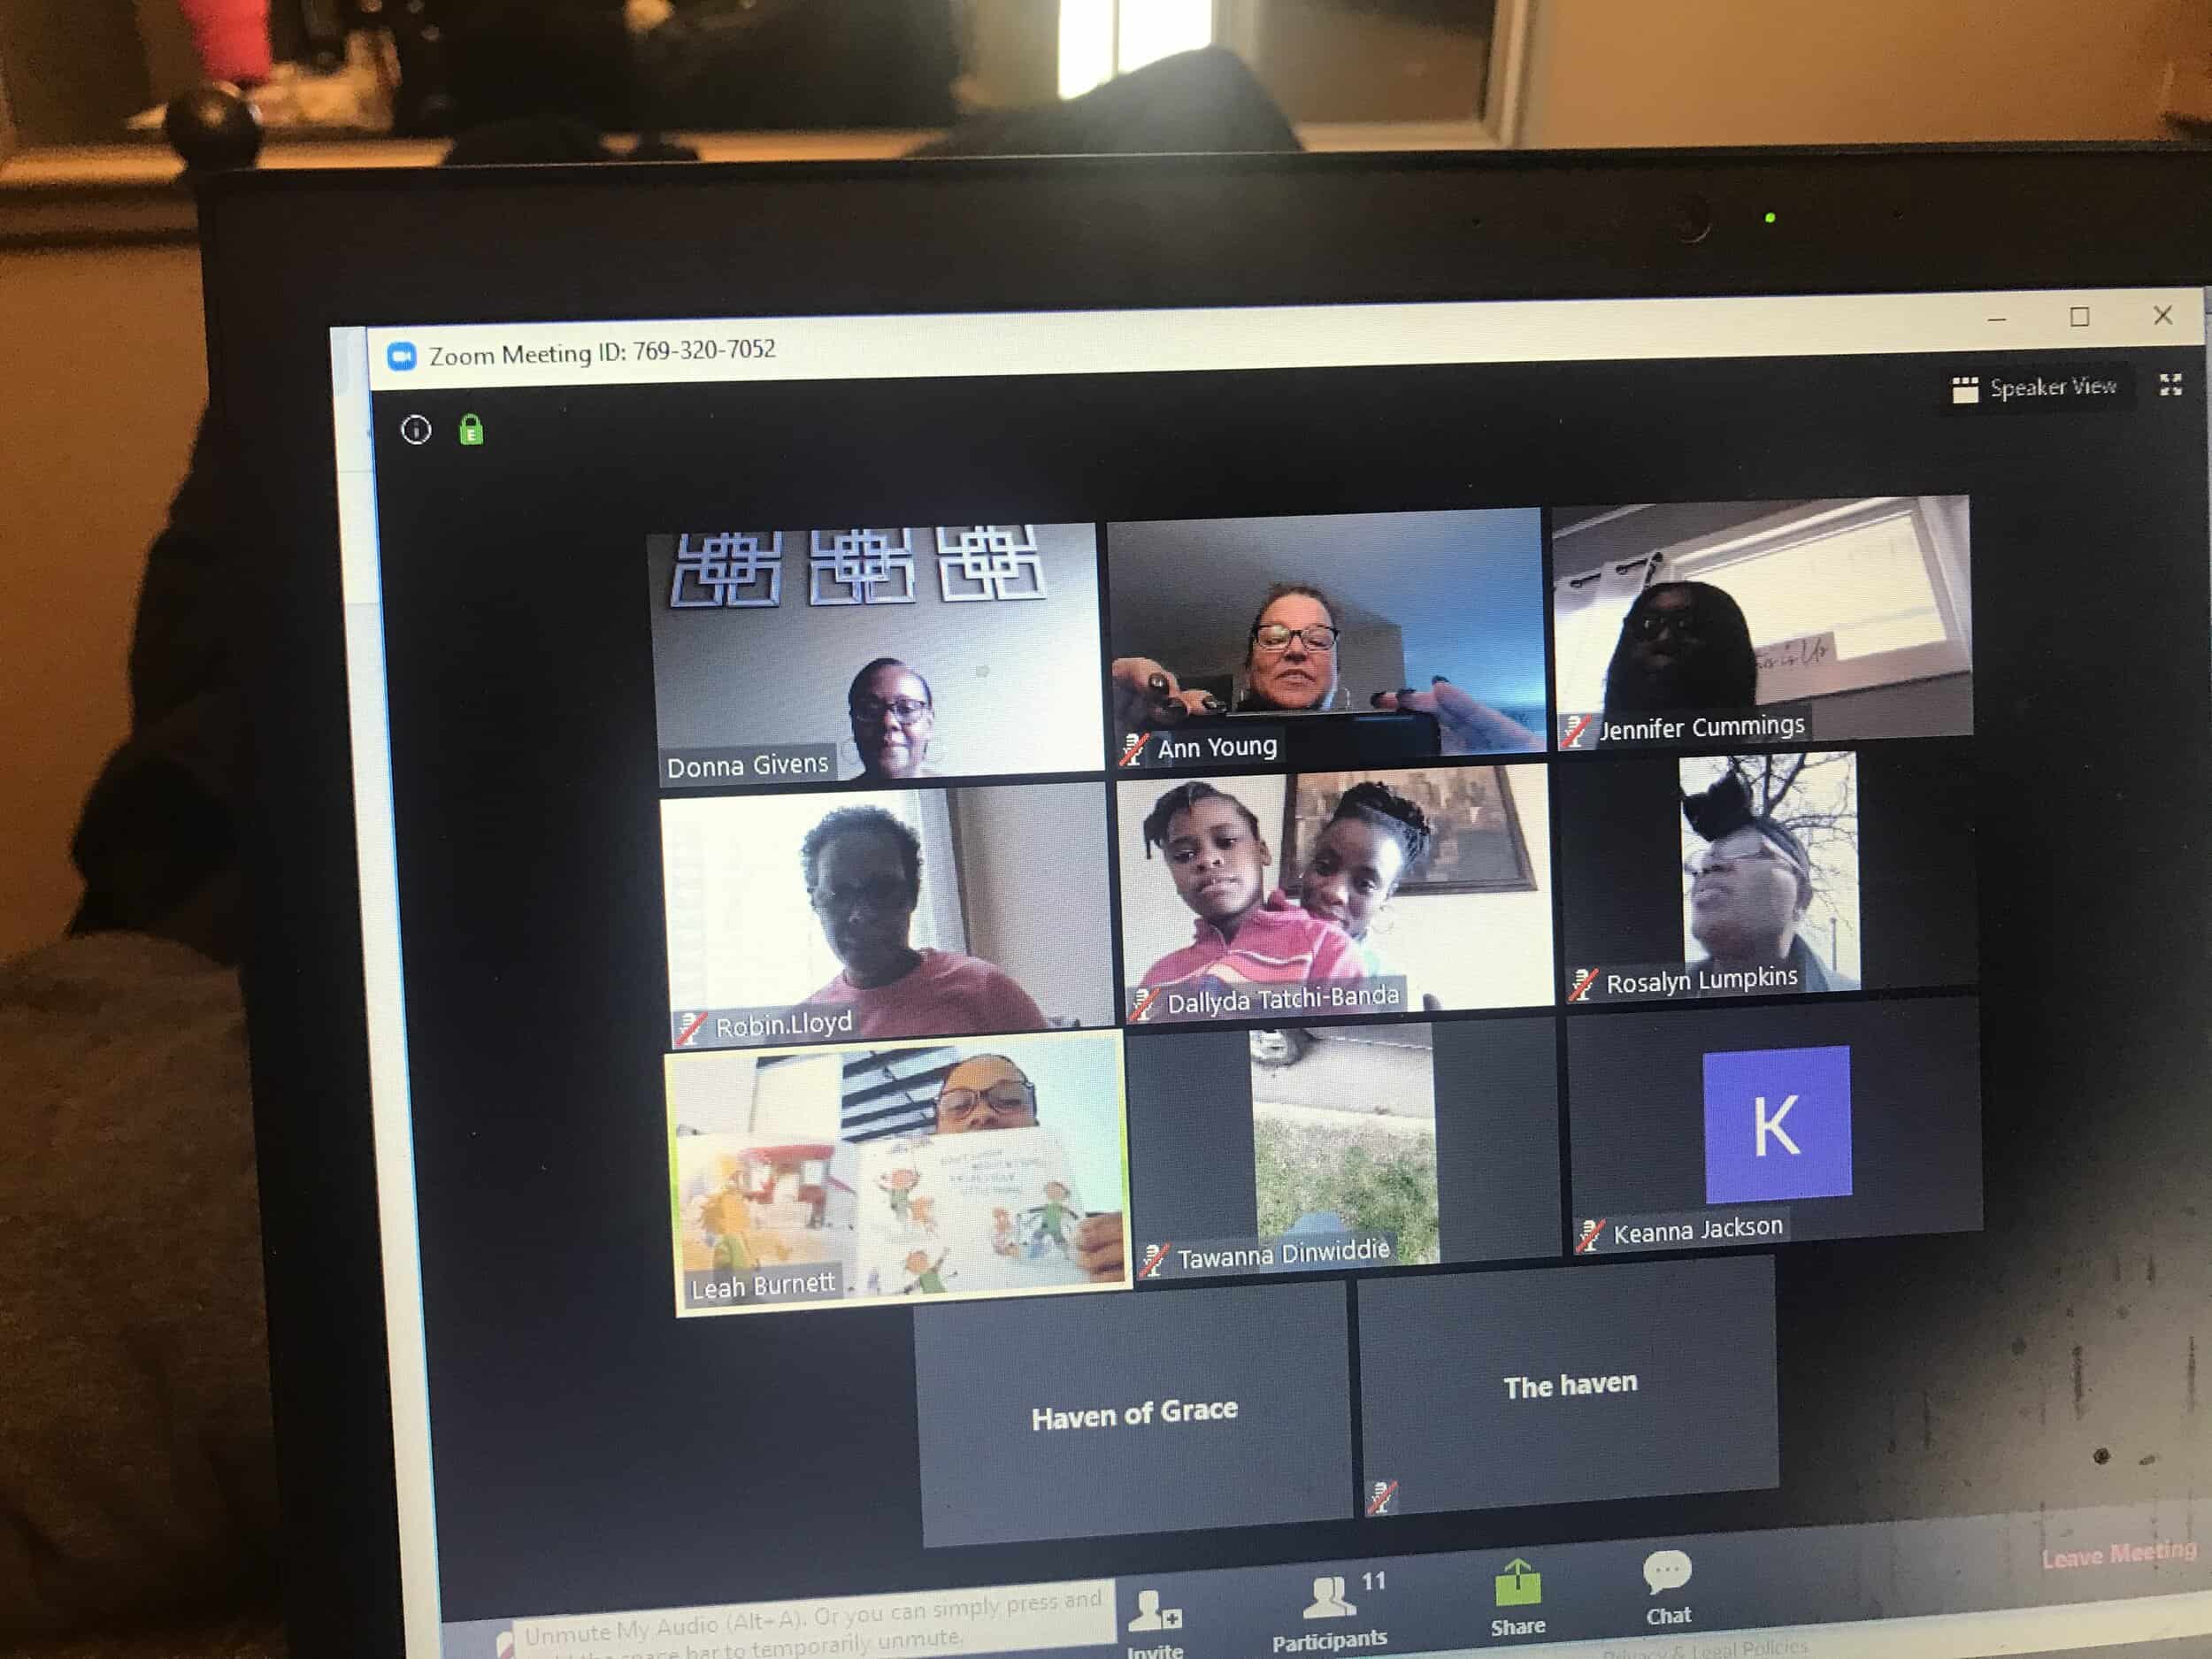 Virtual group connection in progress.